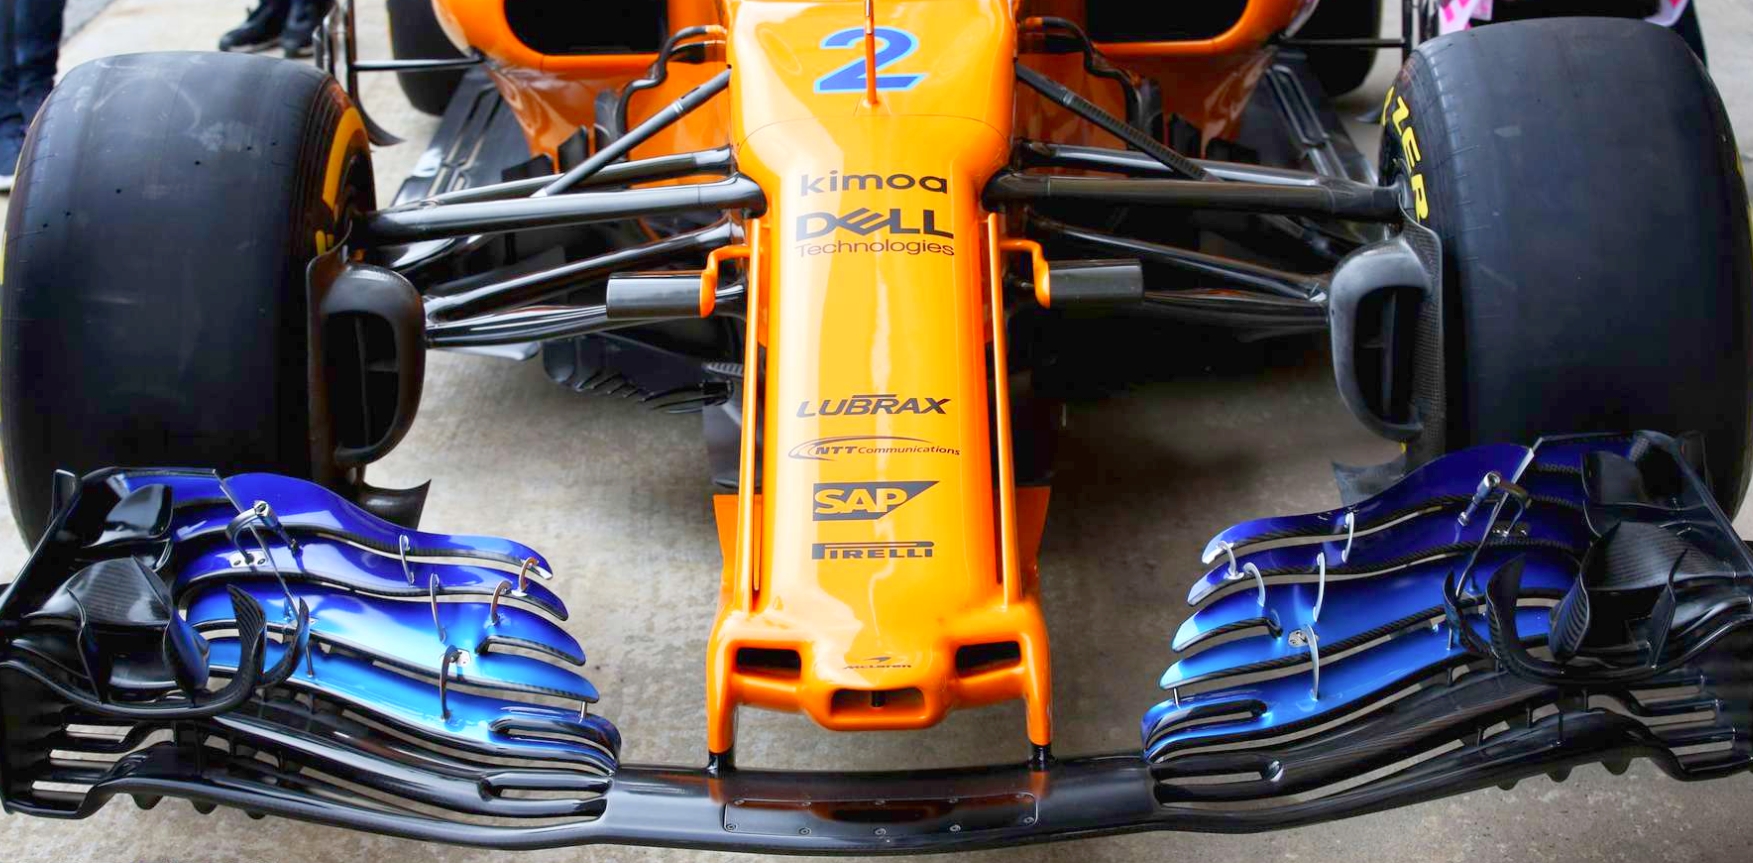 McLaren's new nose in Spain. Now with Renault engine, McLaren is forced to admit their chassis is inferior